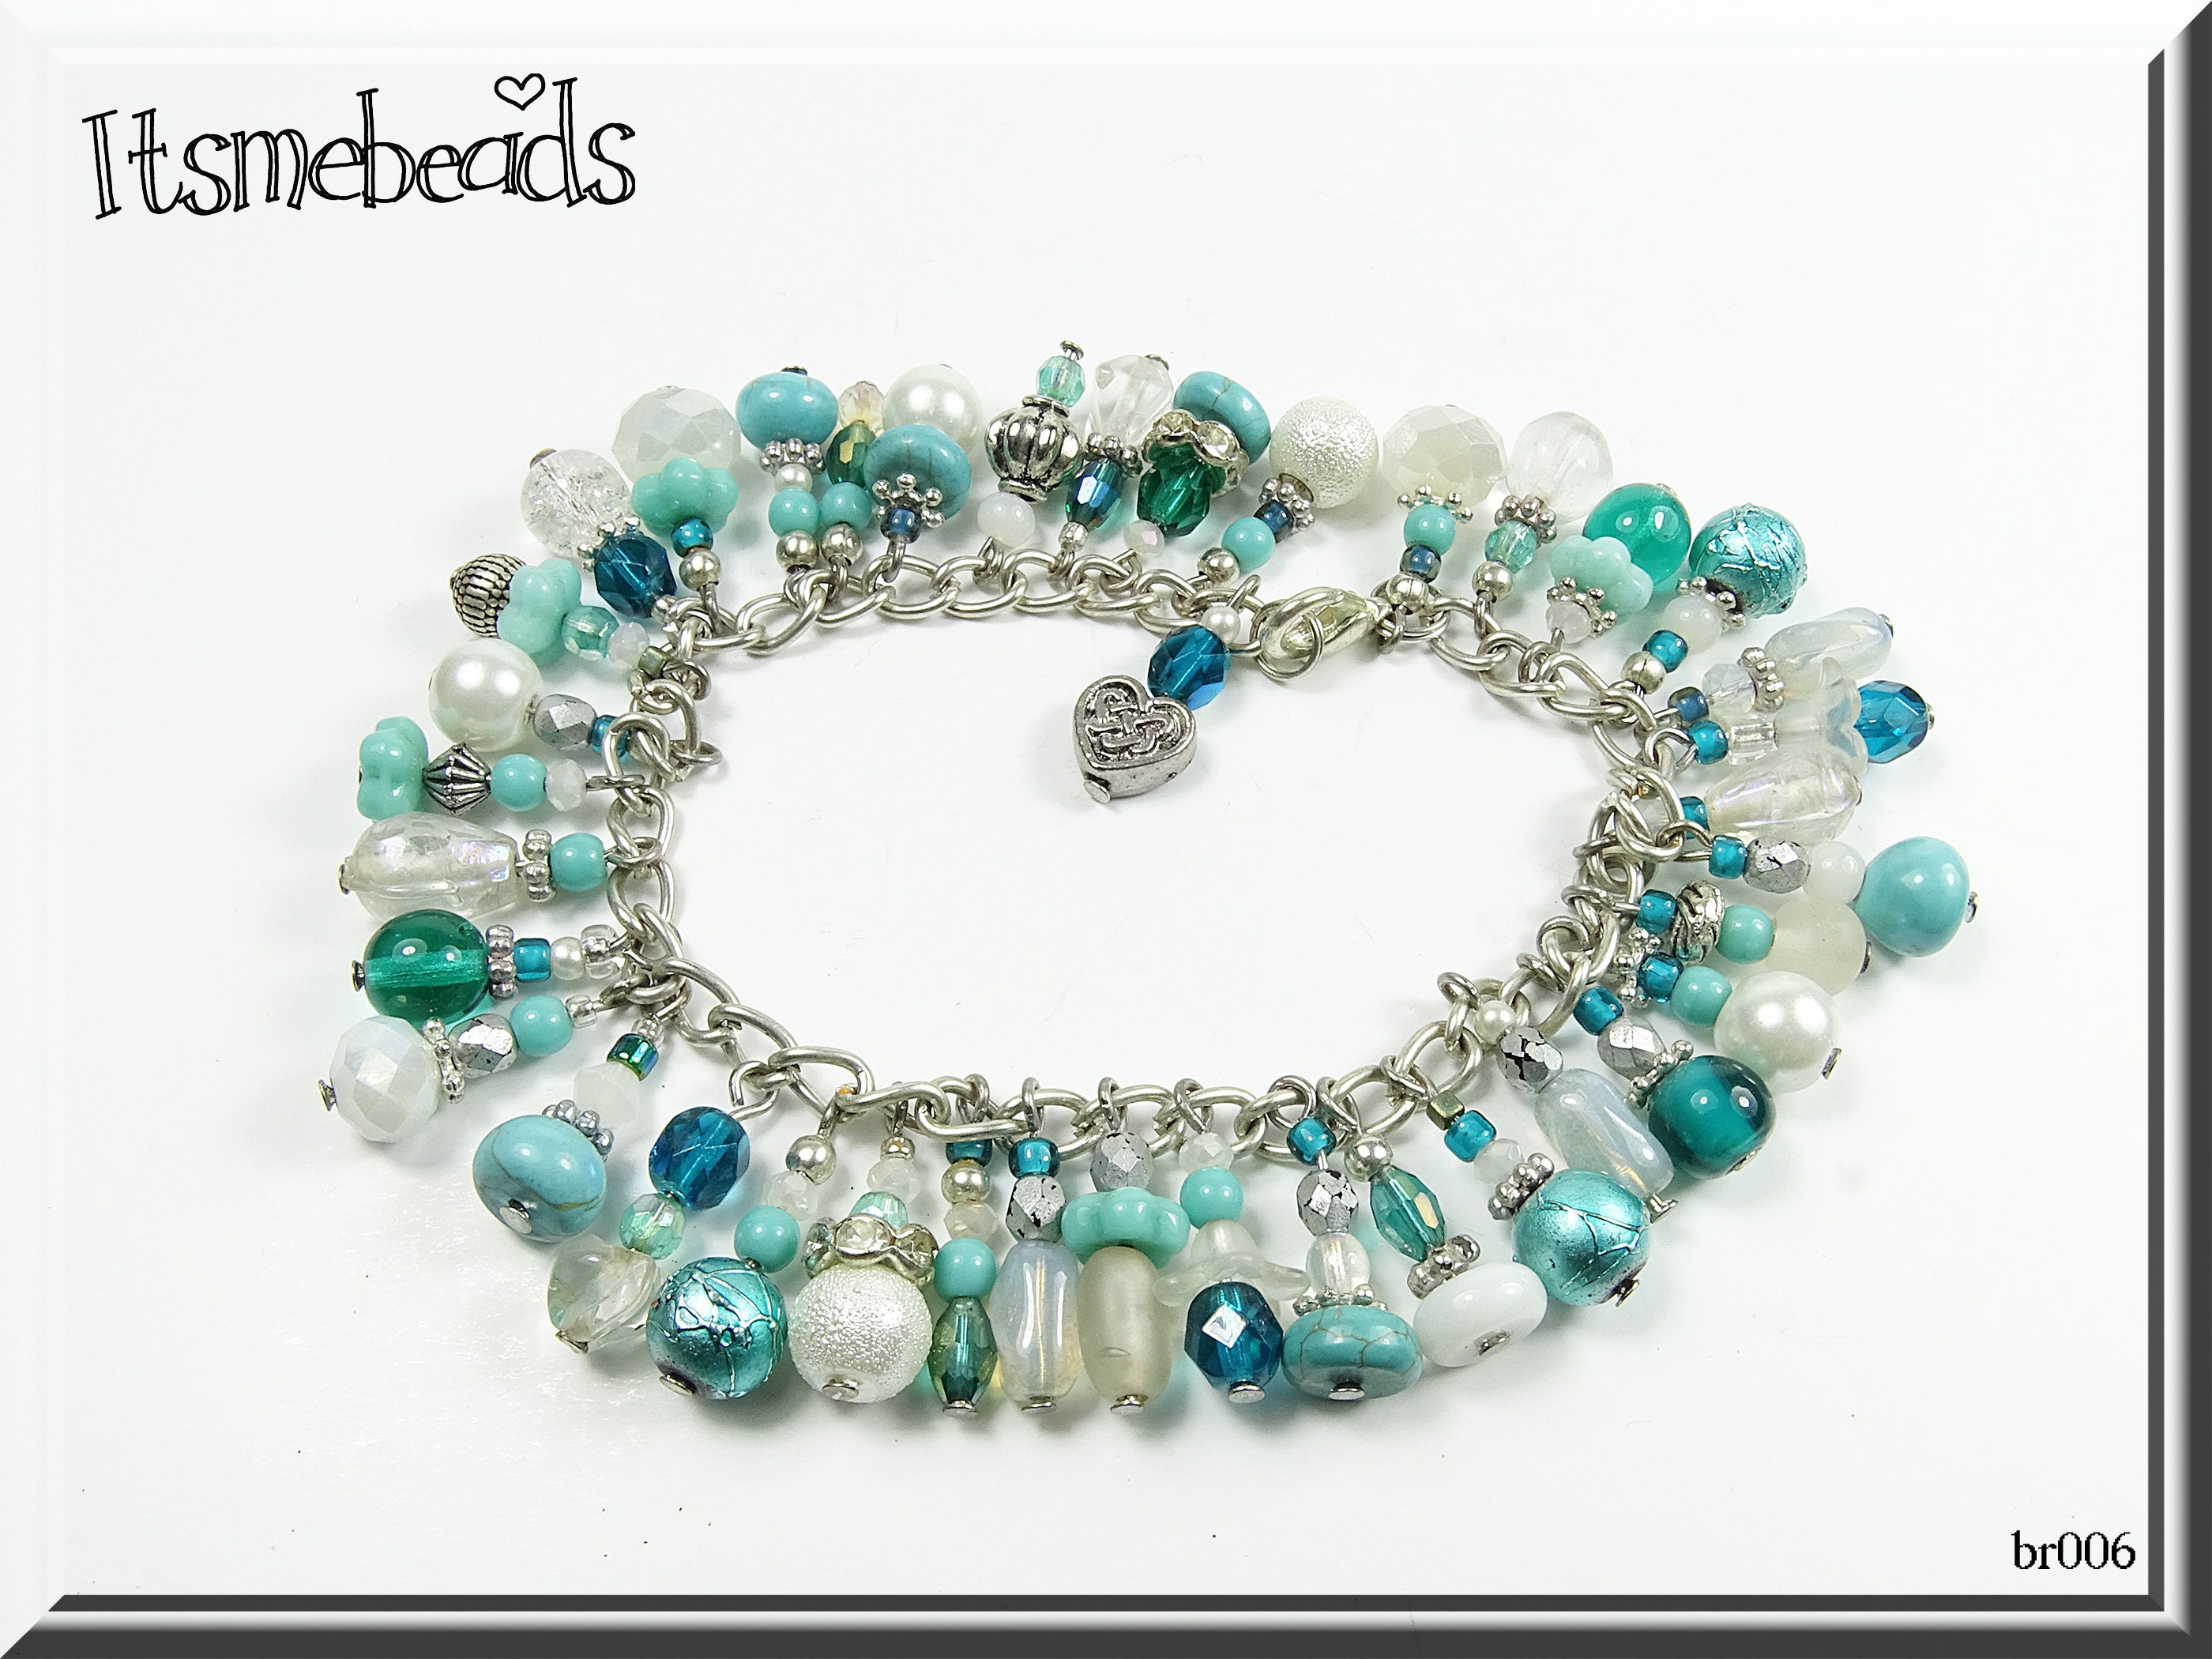 Charm bracelet, beads of imitated turquoise & silver